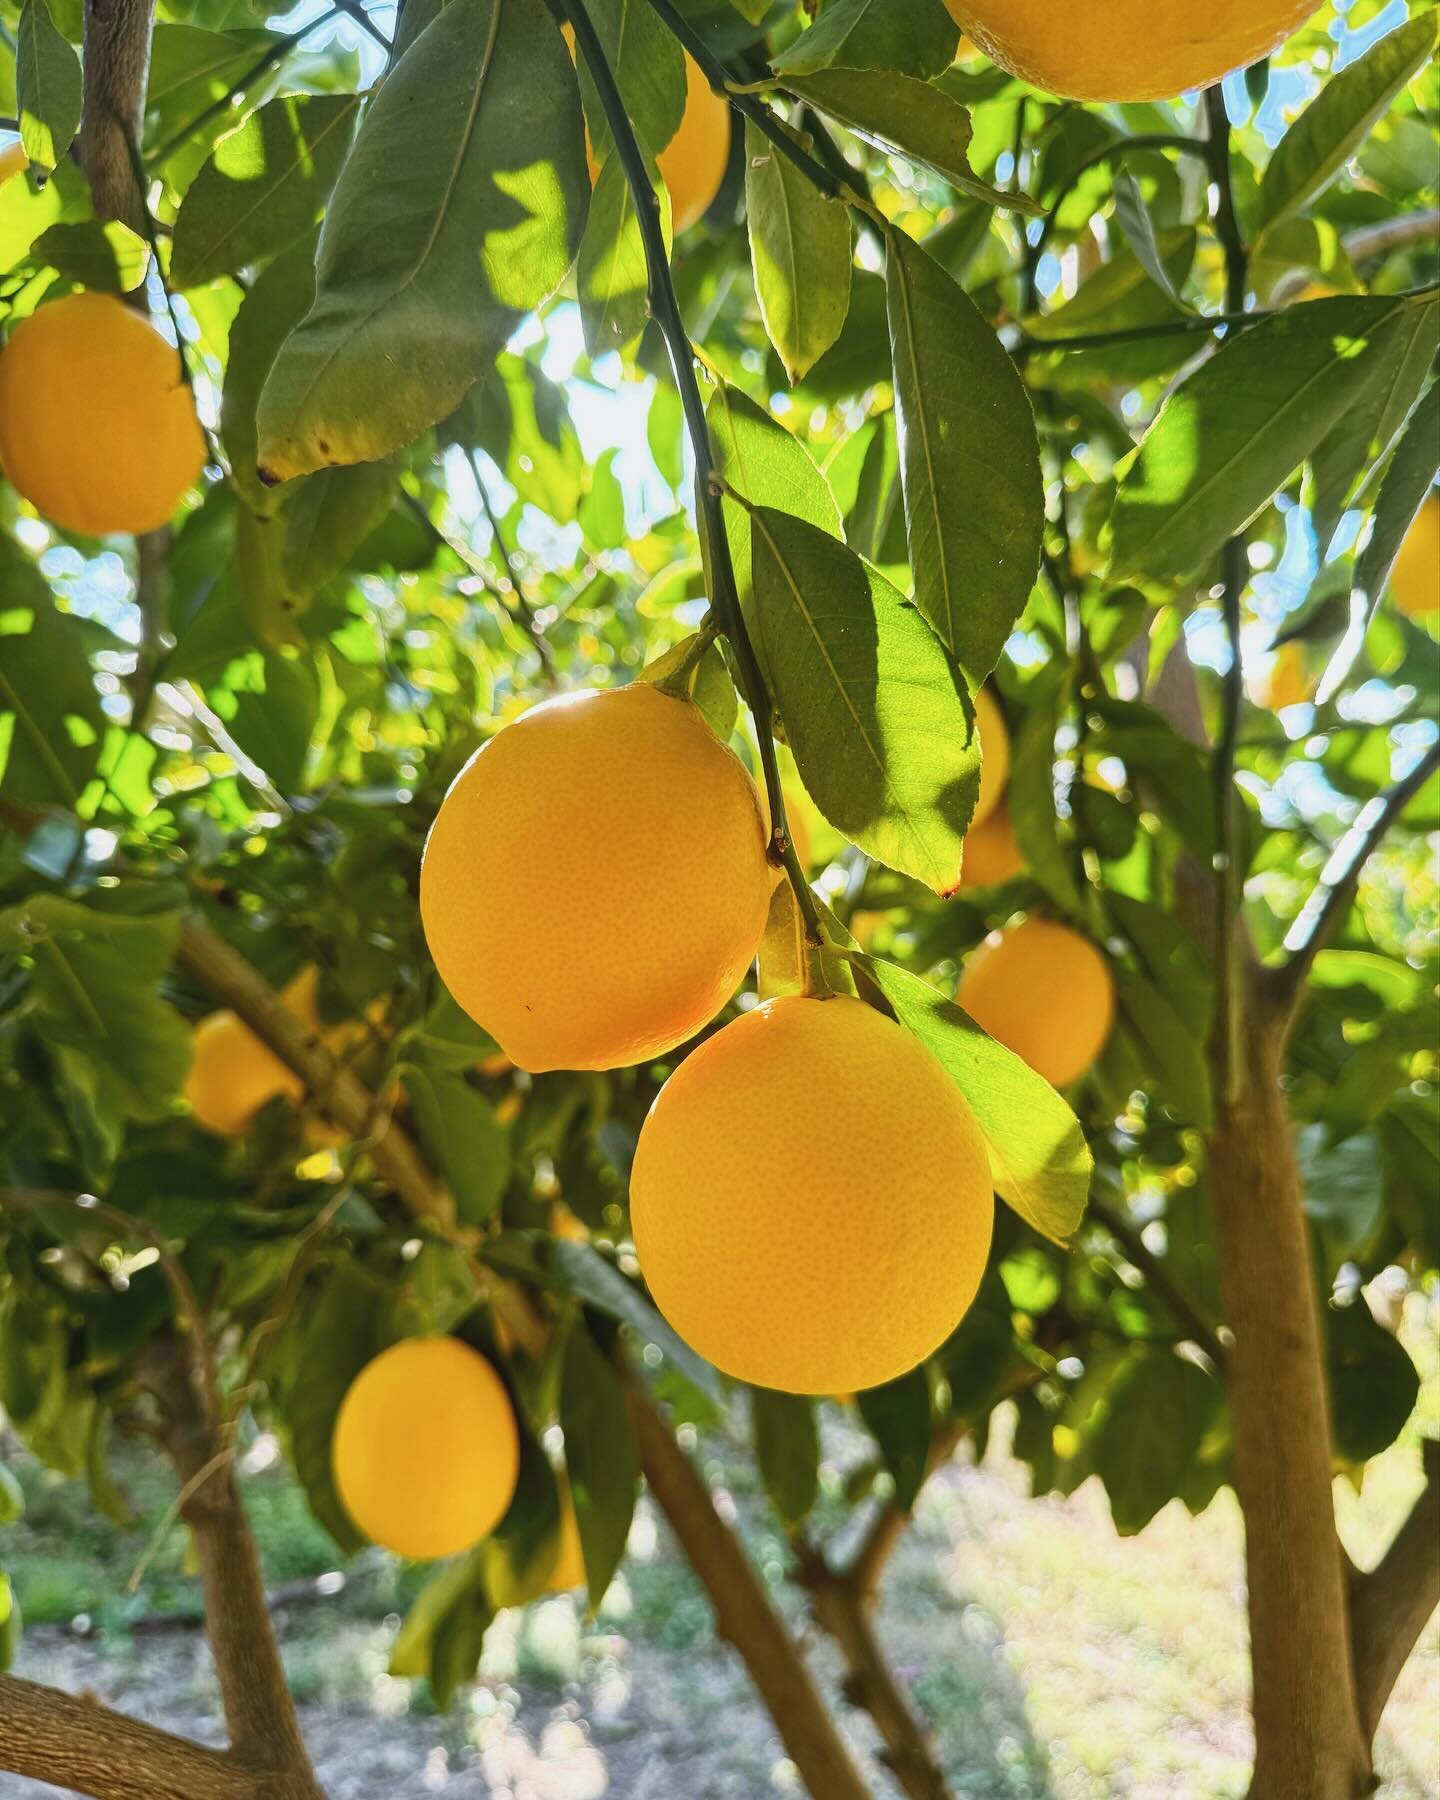 Citrus Season is Here! 🍋

Our citrus harvest has begun and the first batch of lemons are ripe and ready for picking with the grapefruits and oranges not far behind! Get your own one pound batch of fresh citrus free with your stay (dependent on avail